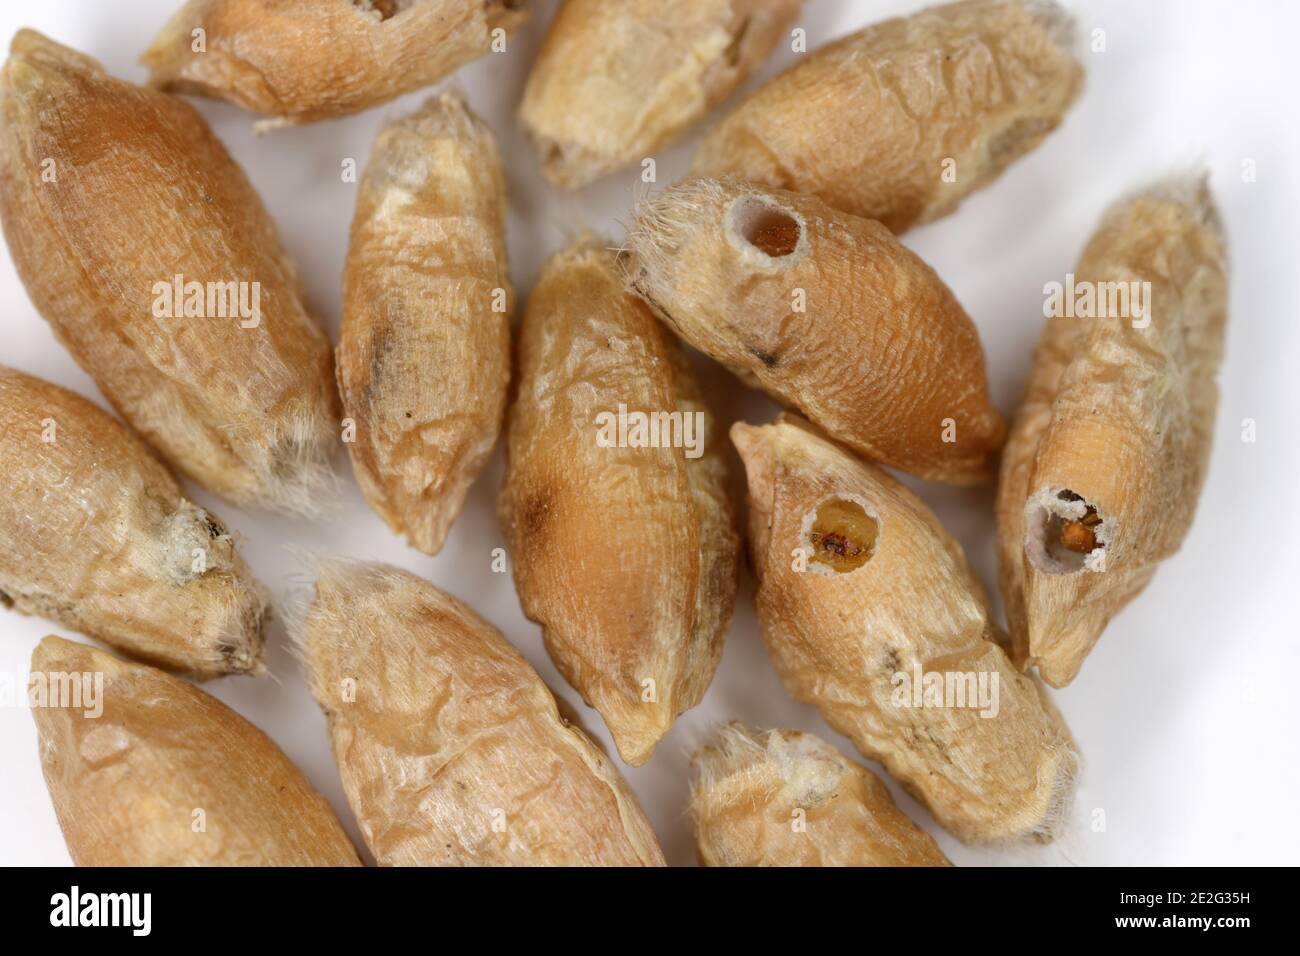 Grain damaged by the Angoumois grain moth (Sitotroga cerealella). It is an important pest of stored grains of cereals, maize, rice and others Stock Photo